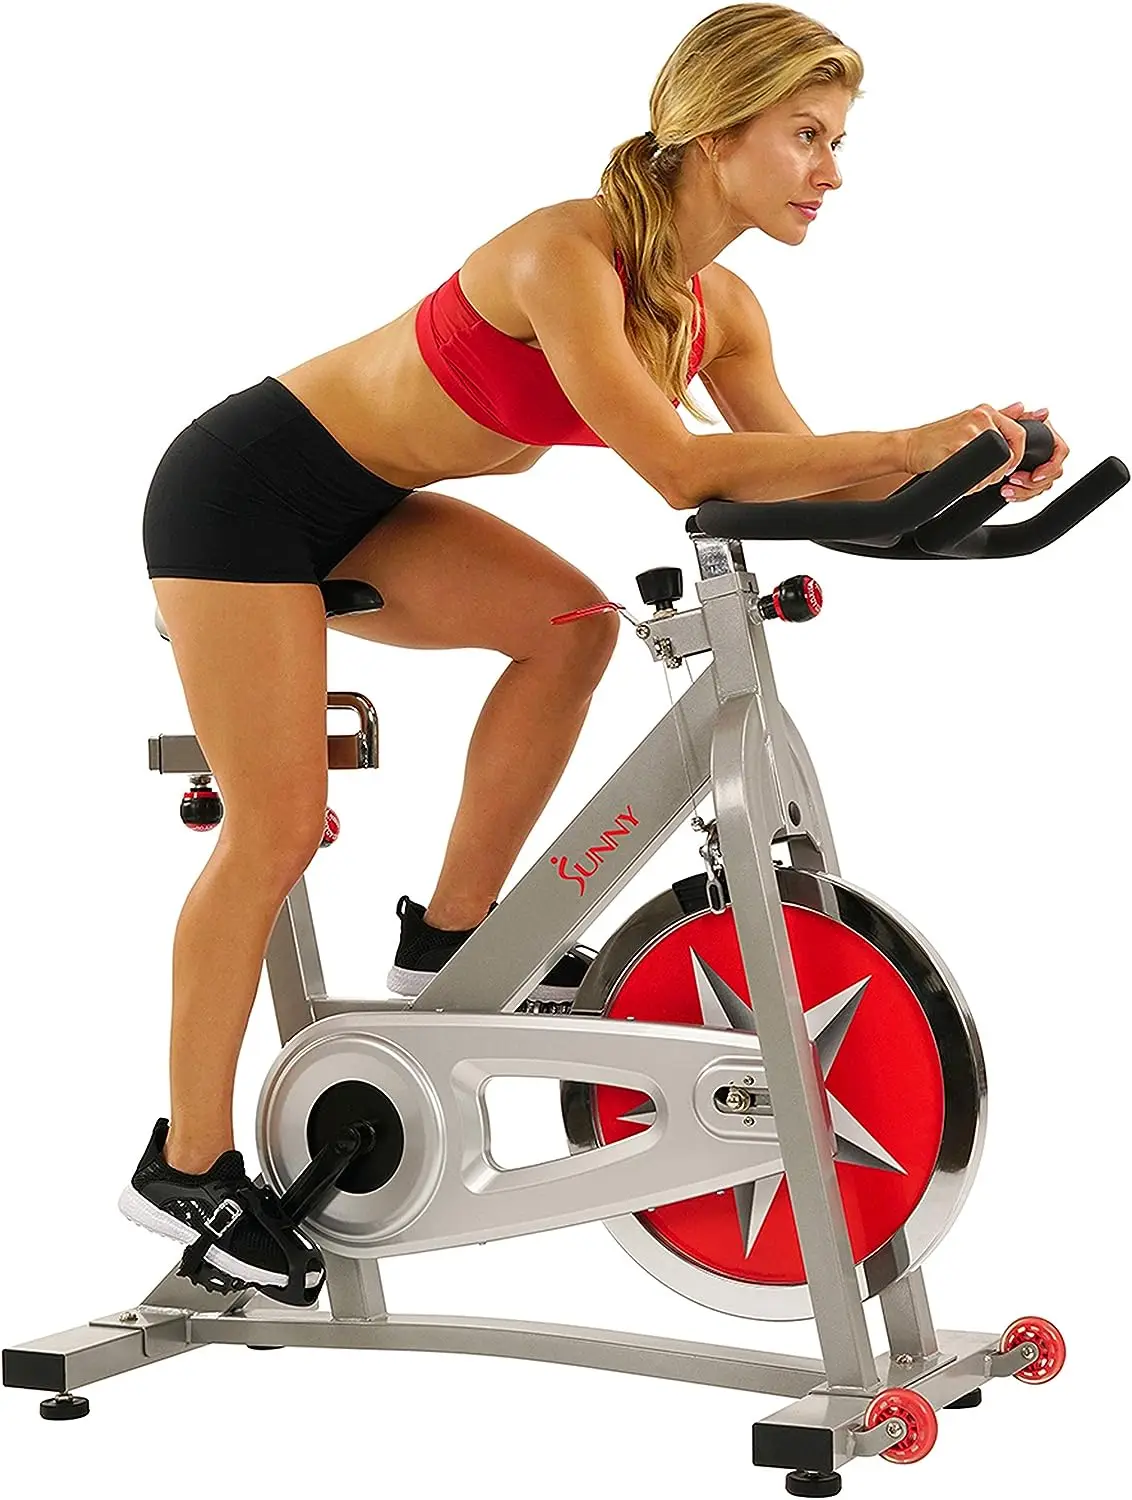 

Health & Fitness SF-B901 Pro Indoor Cycling Exercise Bike